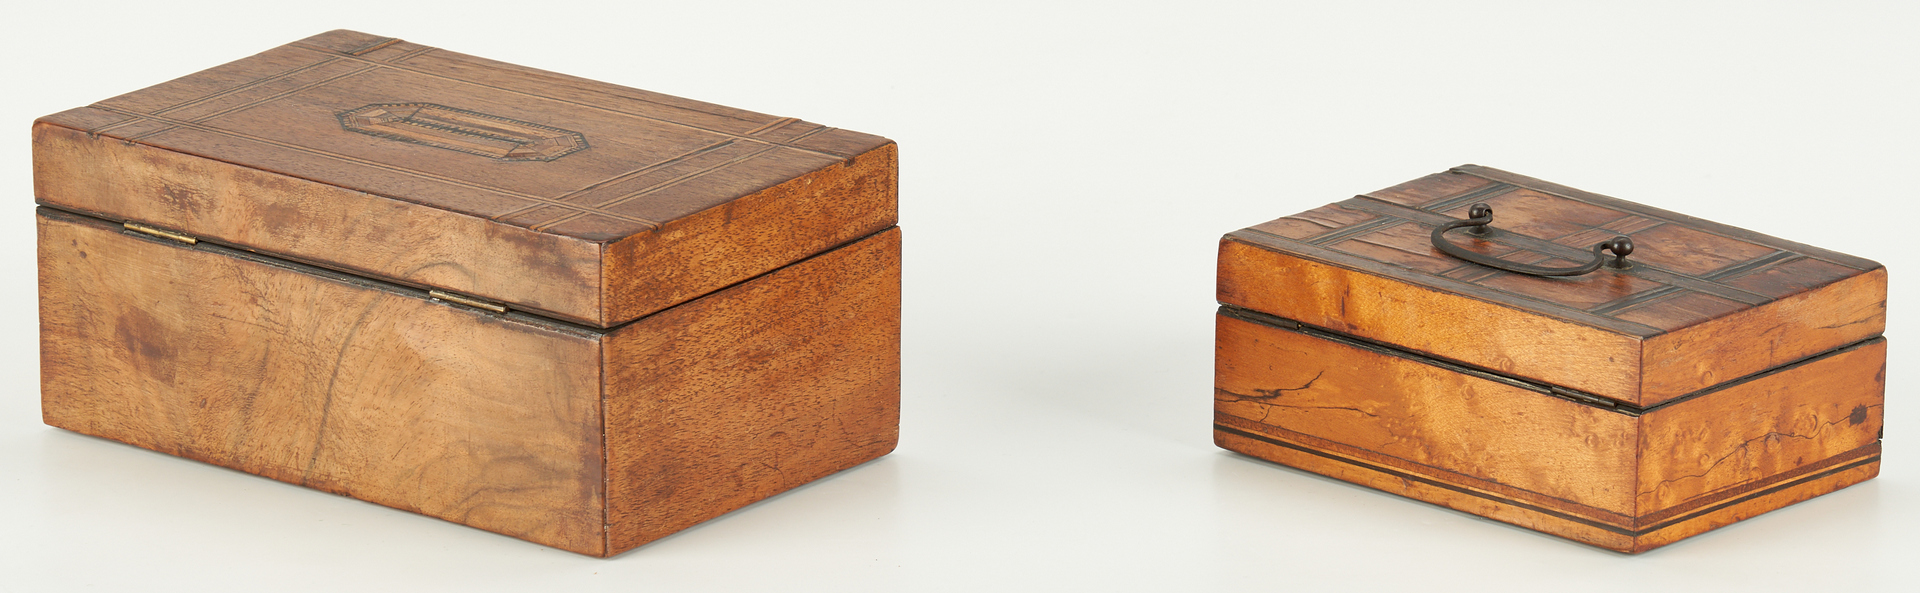 Lot 171: 4 19th Cent. Wooden Boxes, incl. Parquetry